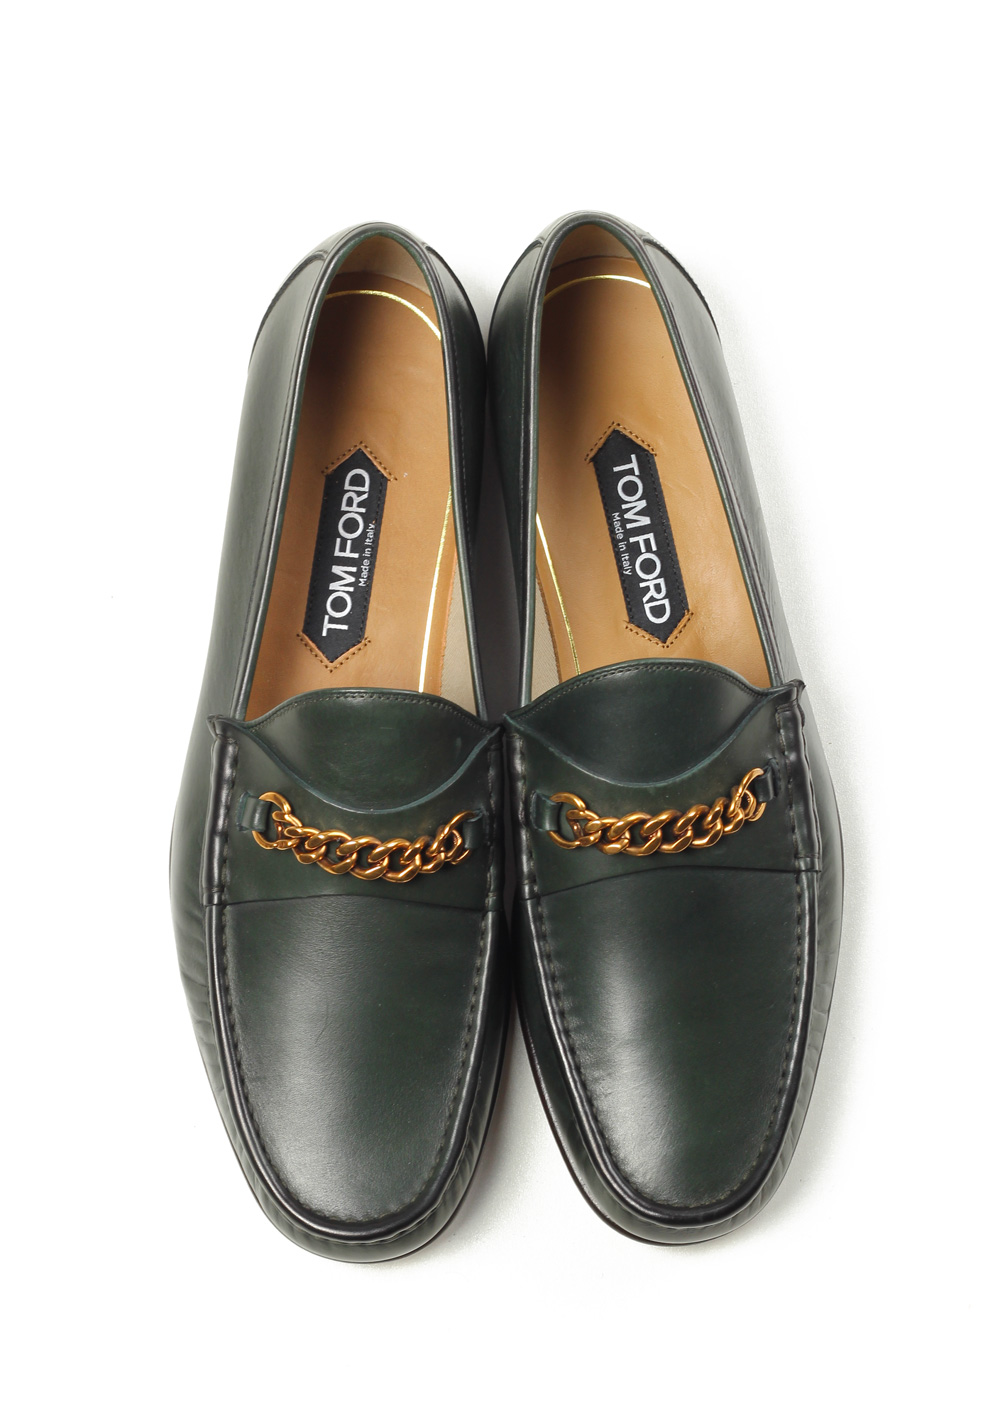 TOM FORD York Green Leather Chain Loafers Shoes Size 8,5 UK / 9,5 U.S. | Costume Limité